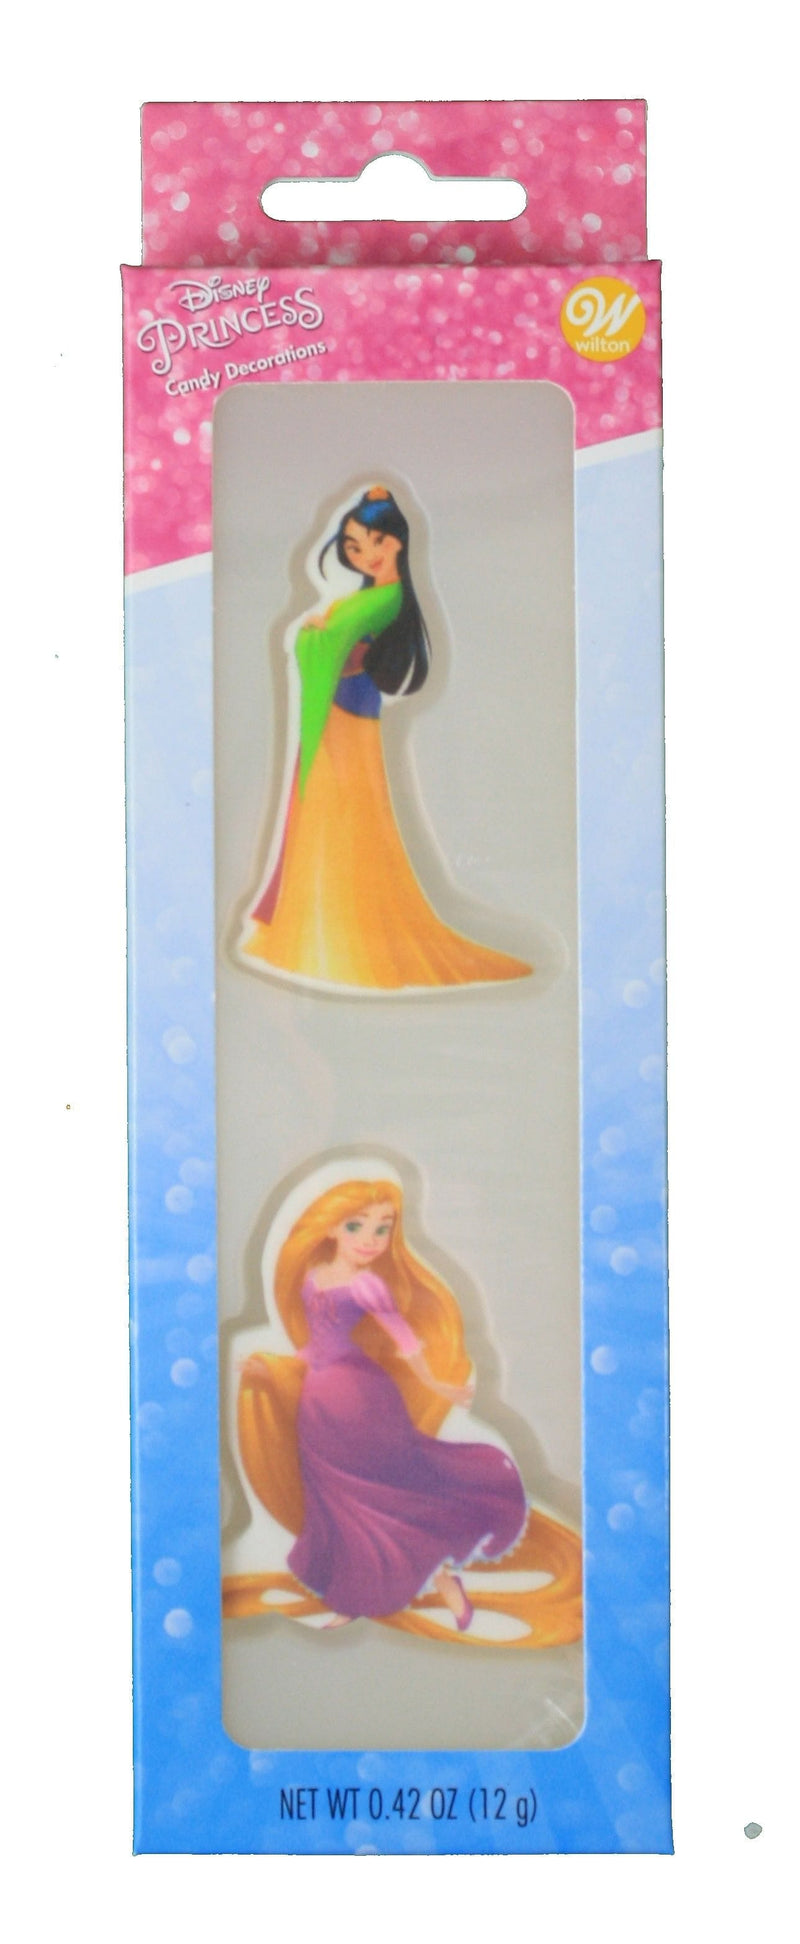 Wilton Disney Princess Icing Decorations - Shelburne Country Store